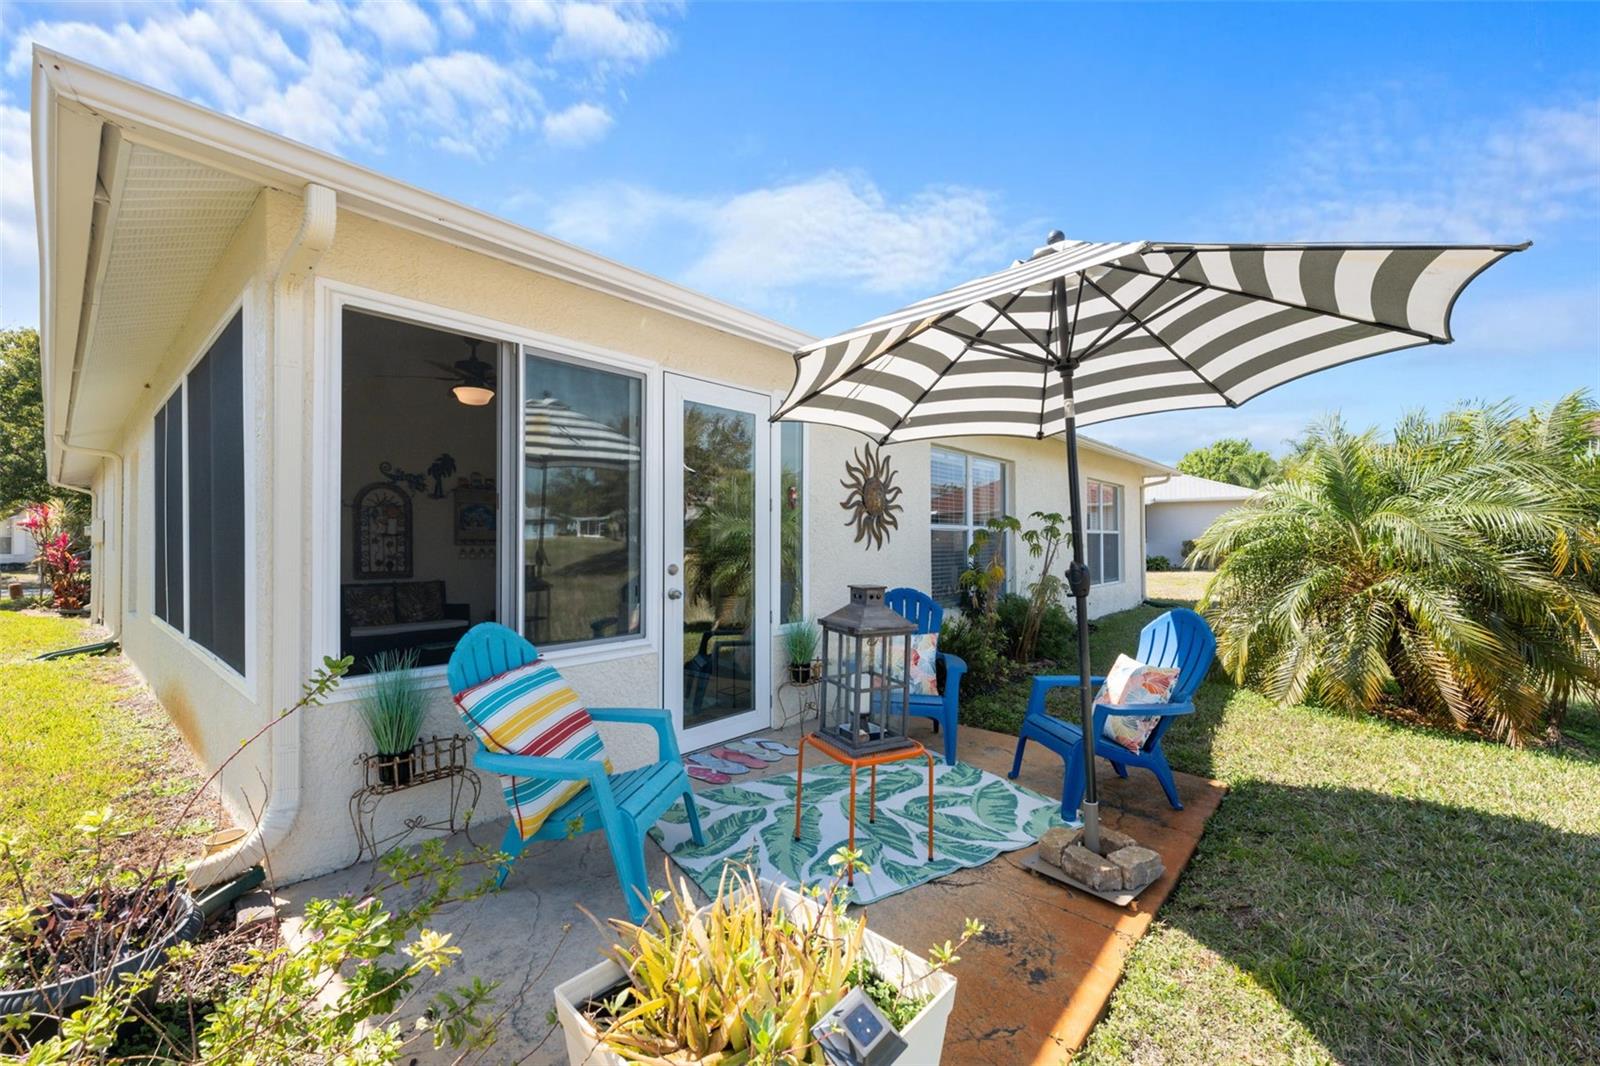 Adorable outside space! Relax and watch the golf carts go by...